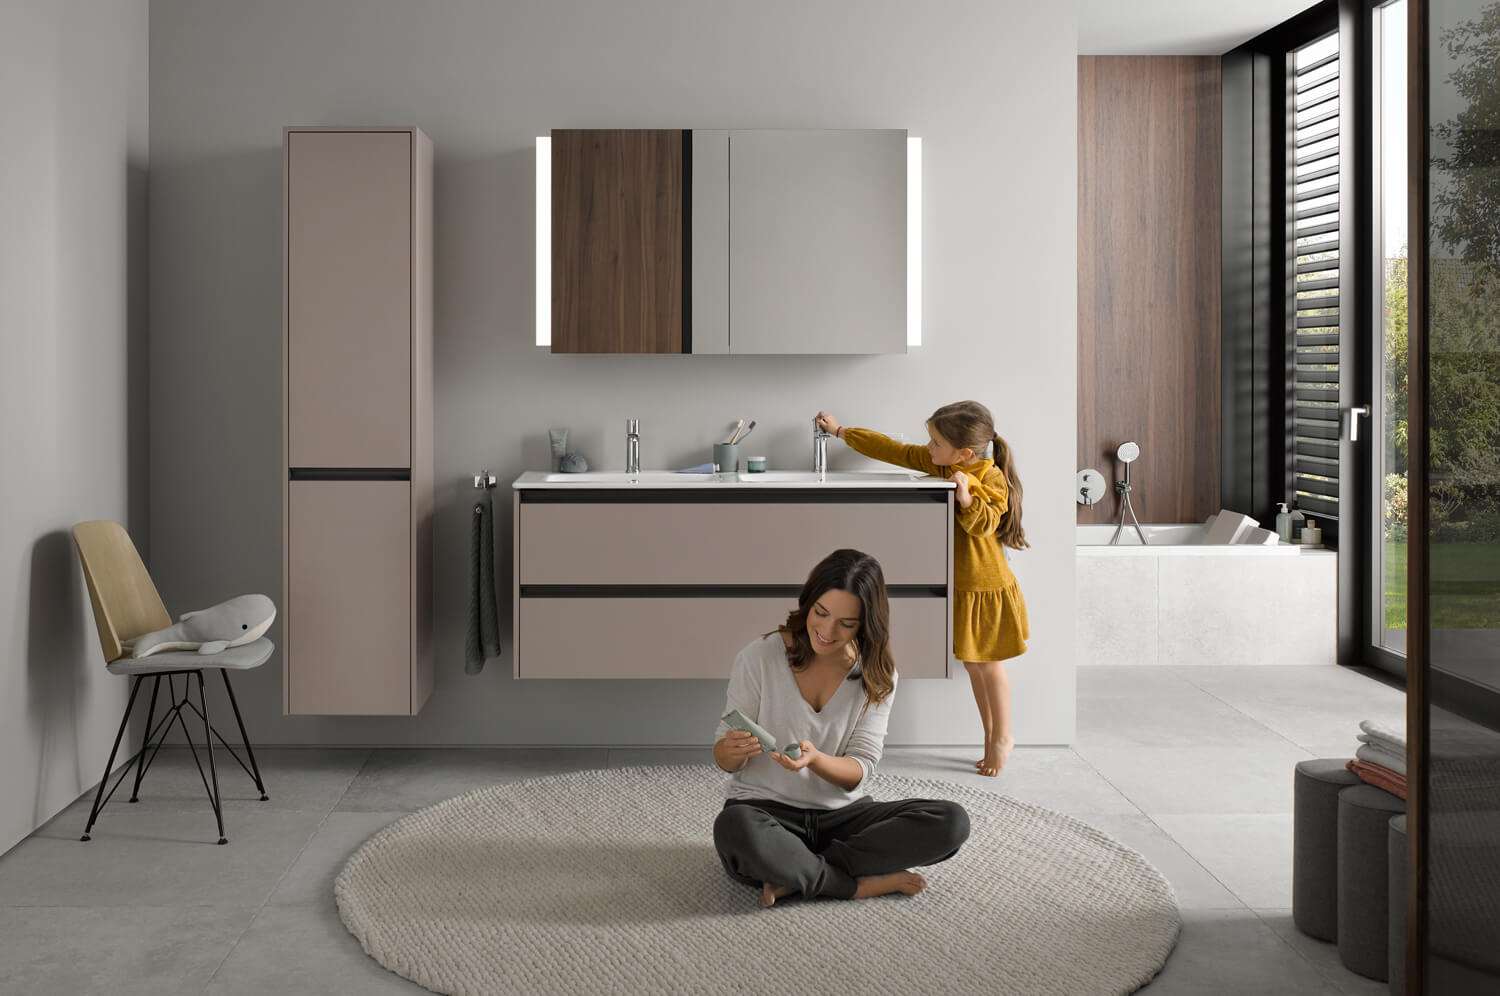 People in a modern bathroom with Ketho.2 furniture
